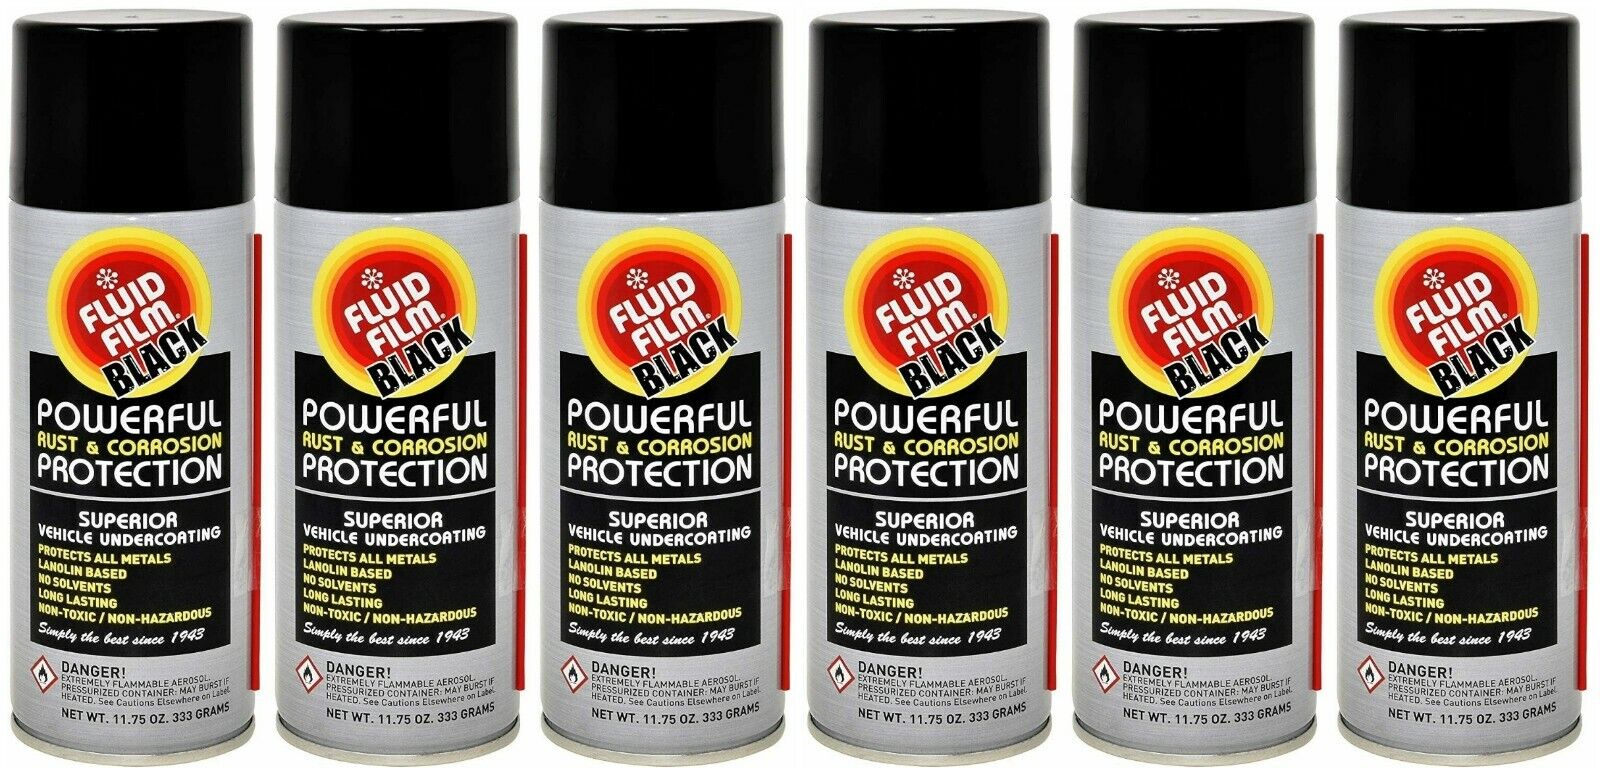 Fluid Film AS11B Undercoating Protection Rust Inhibitor Spray Can Black, 6 Pack